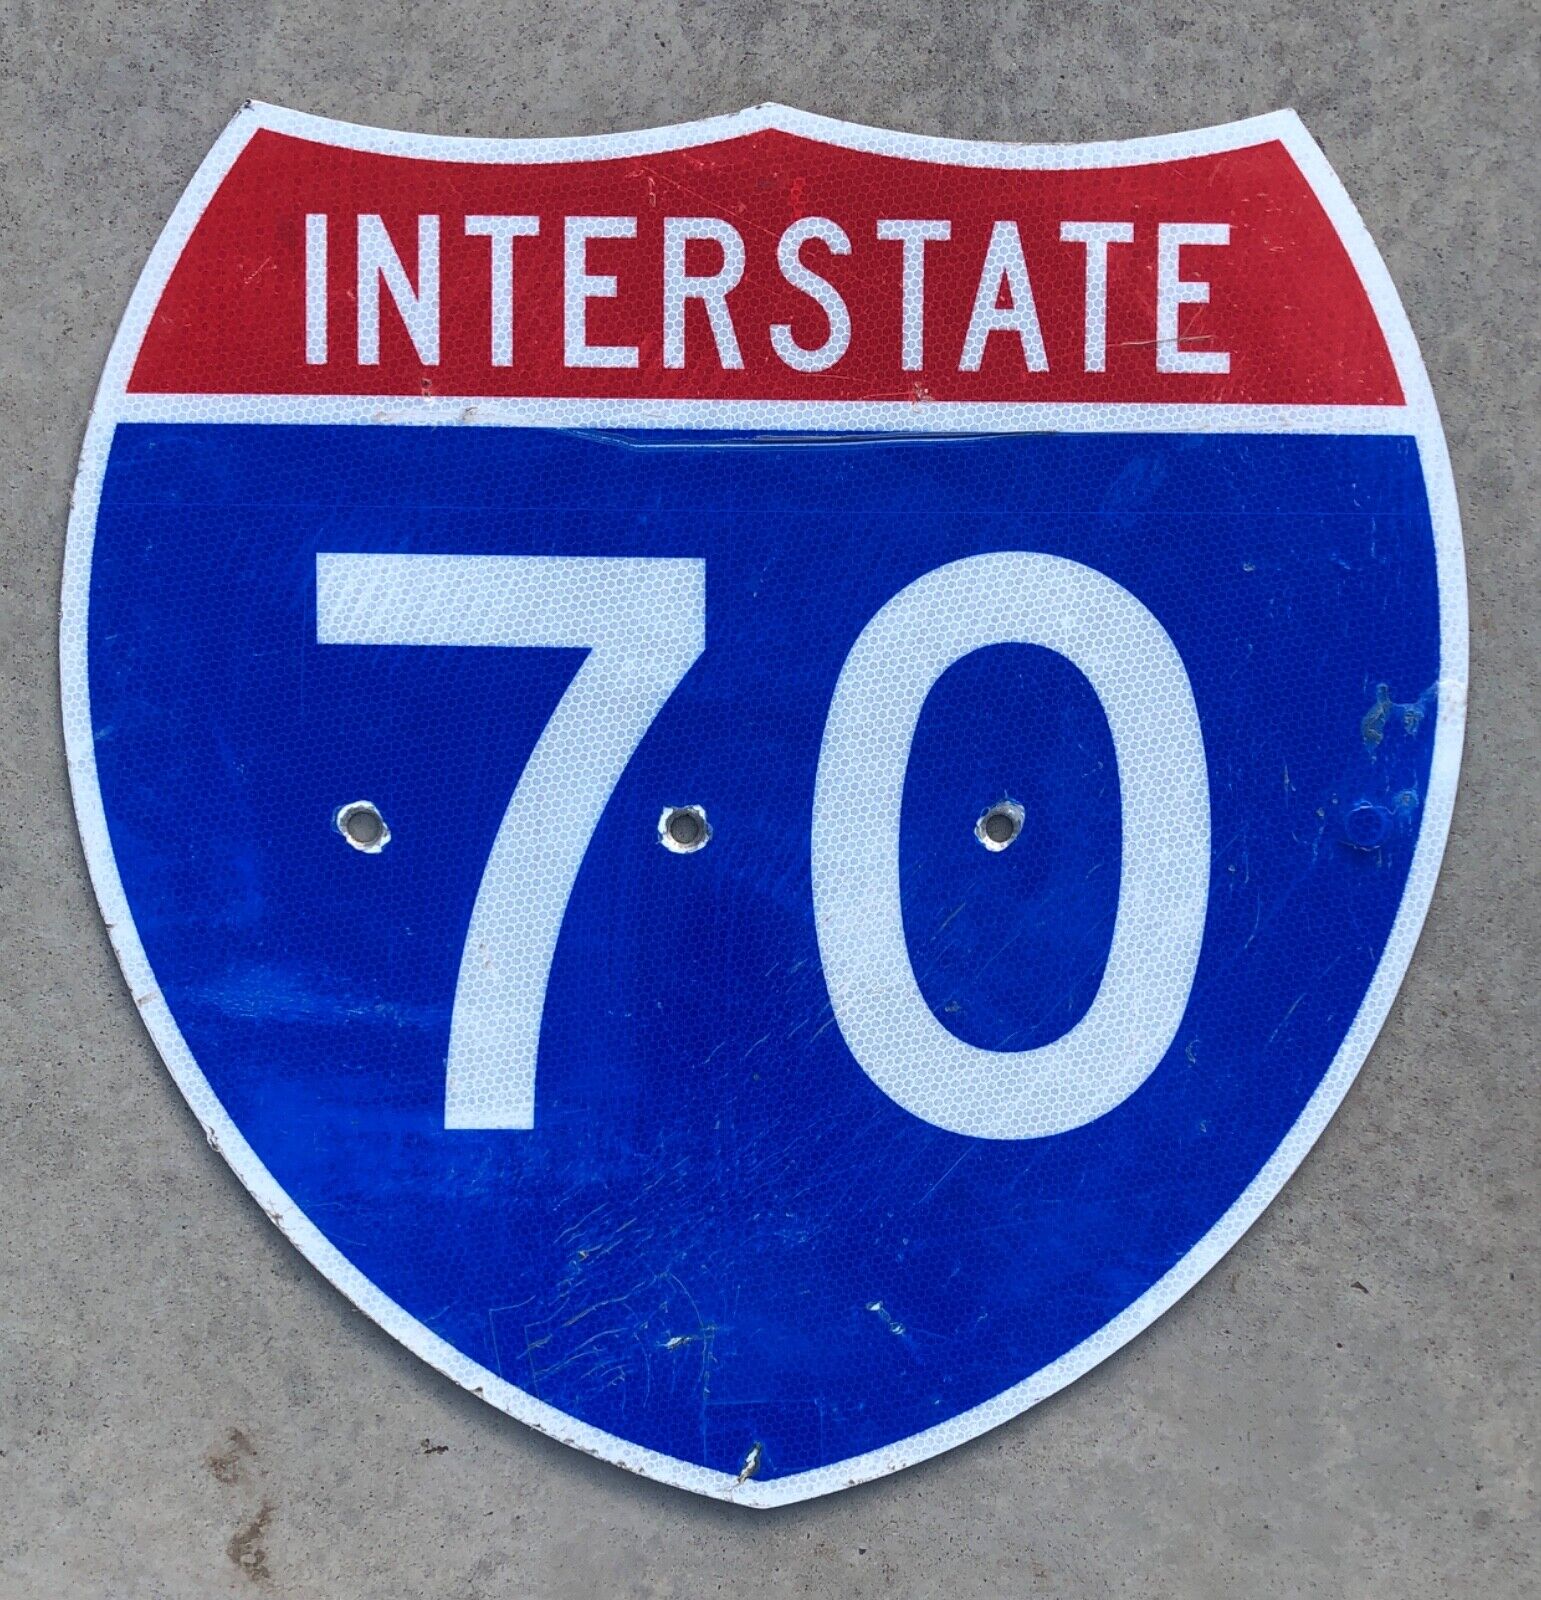 Vintage retired Interstate 70 sign 24x24 inches good cond